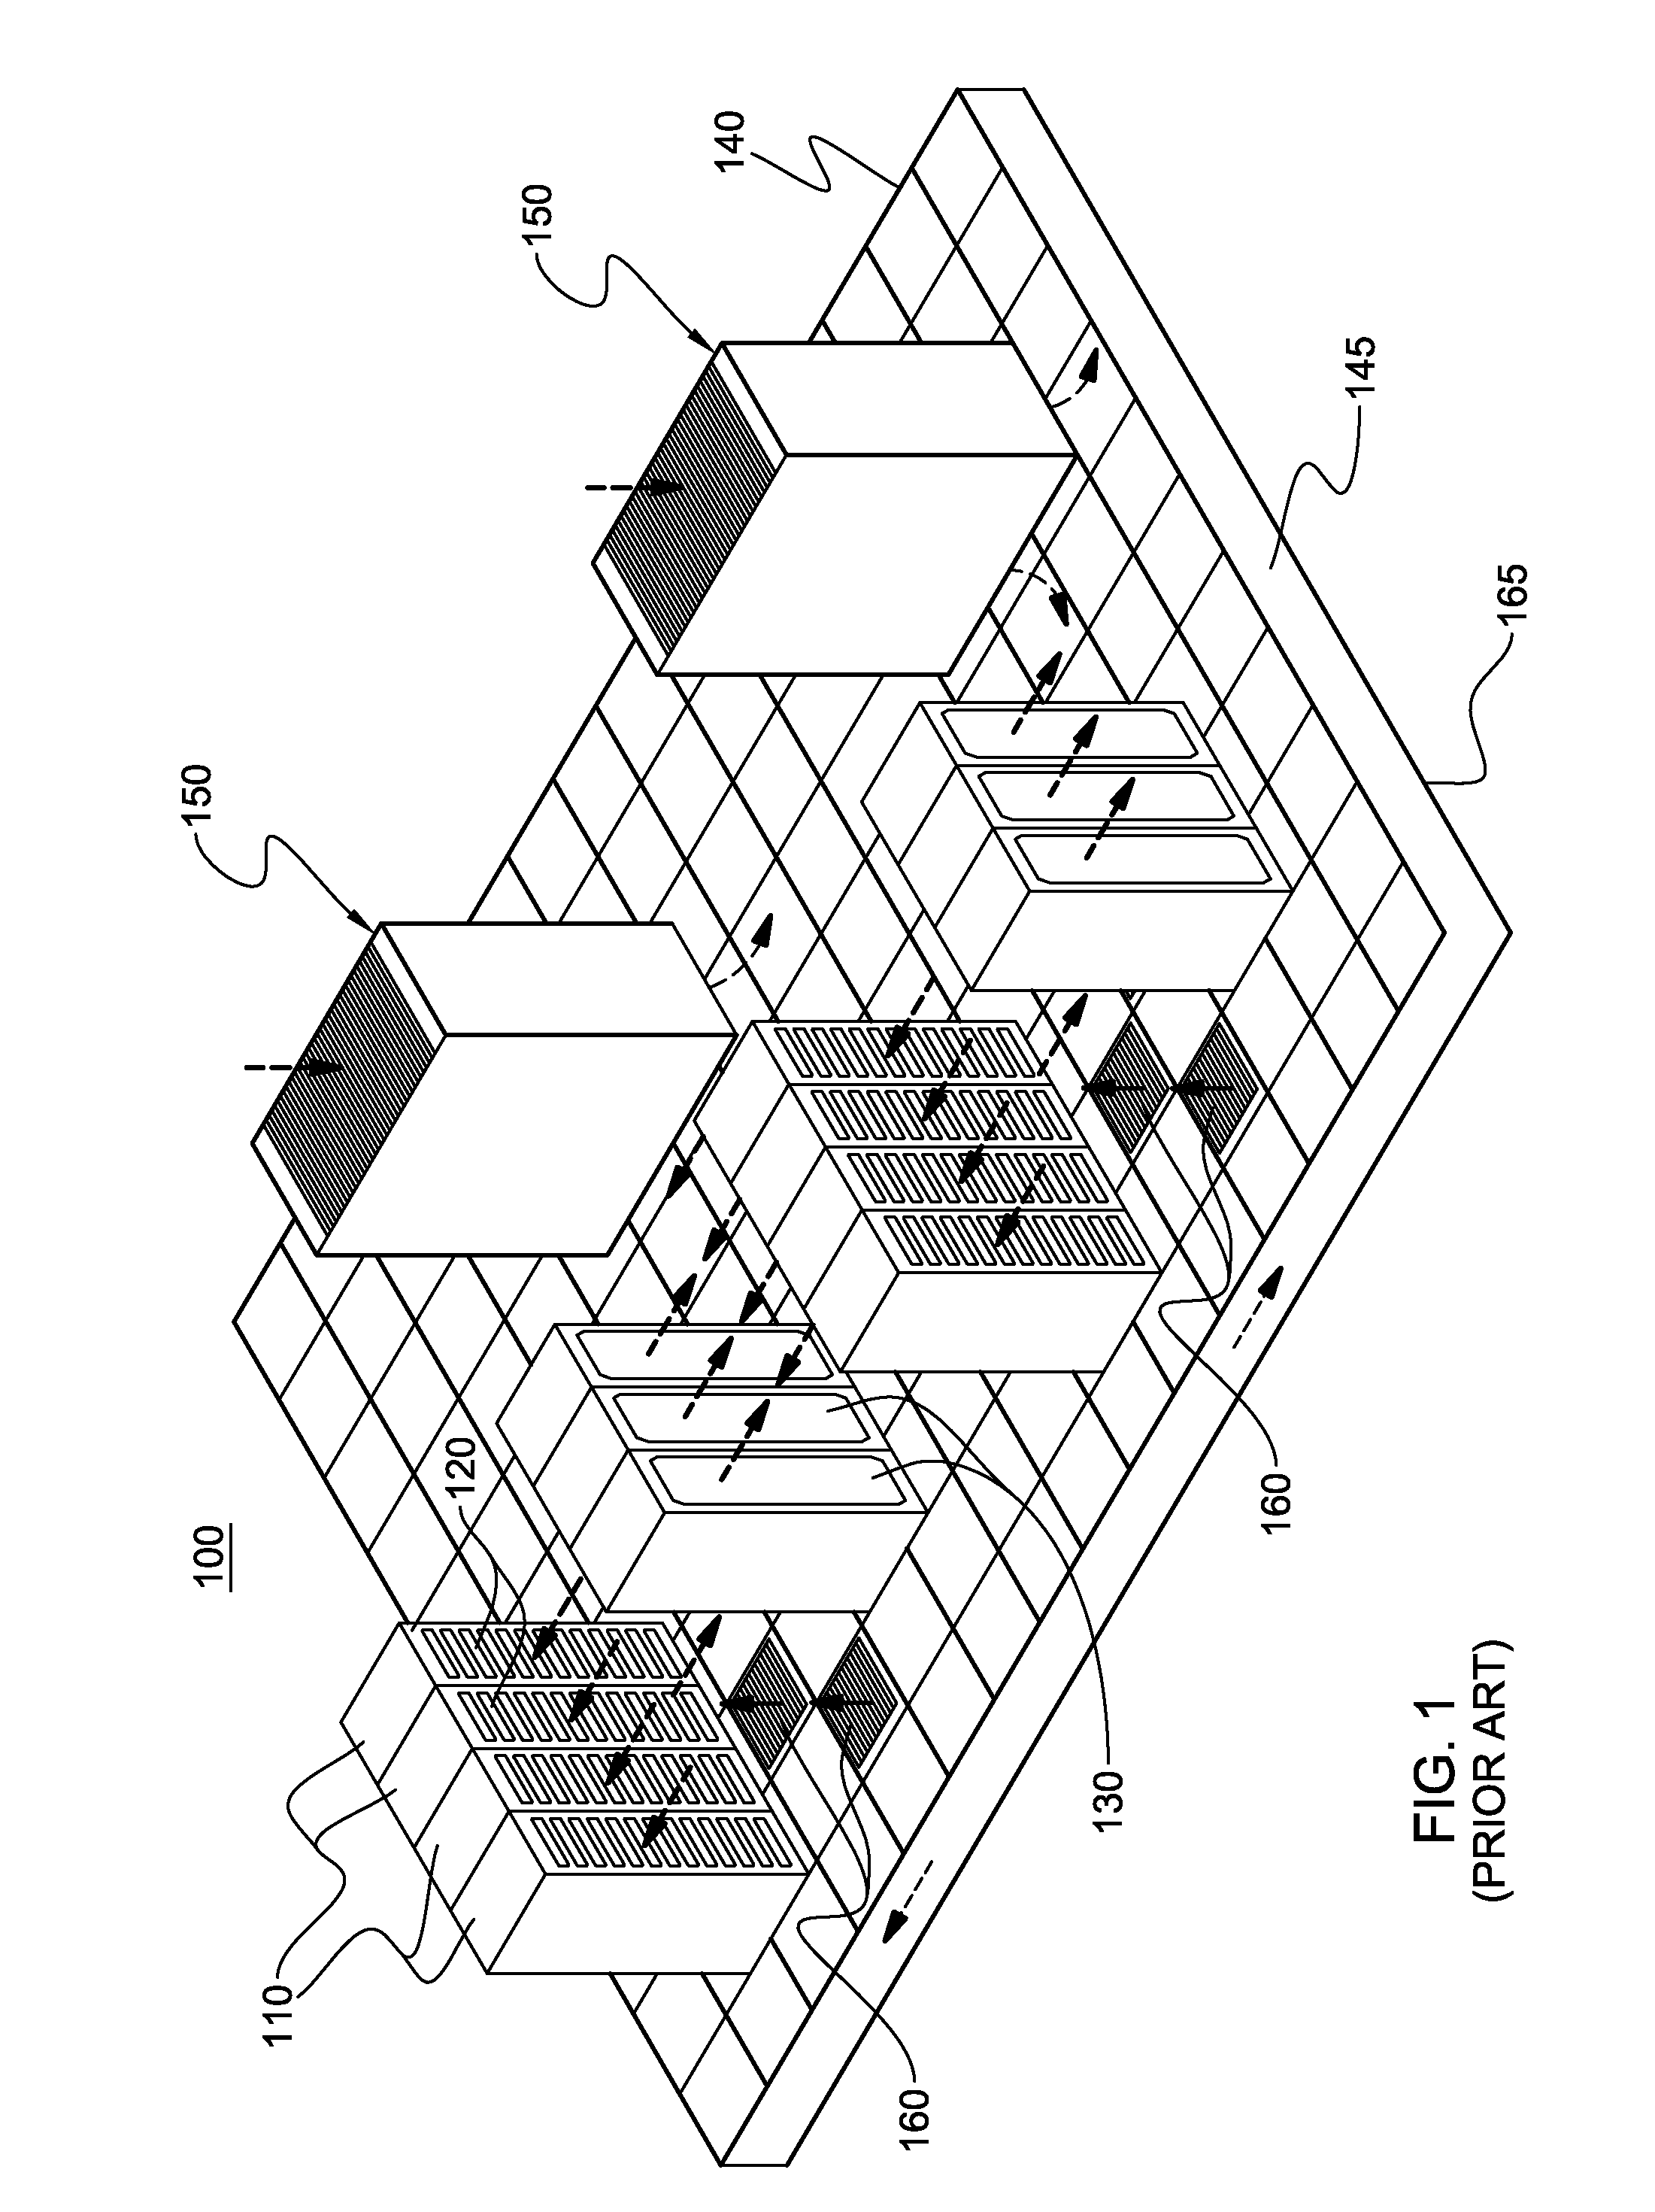 Immersion-cooling of selected electronic component(s) mounted to printed circuit board